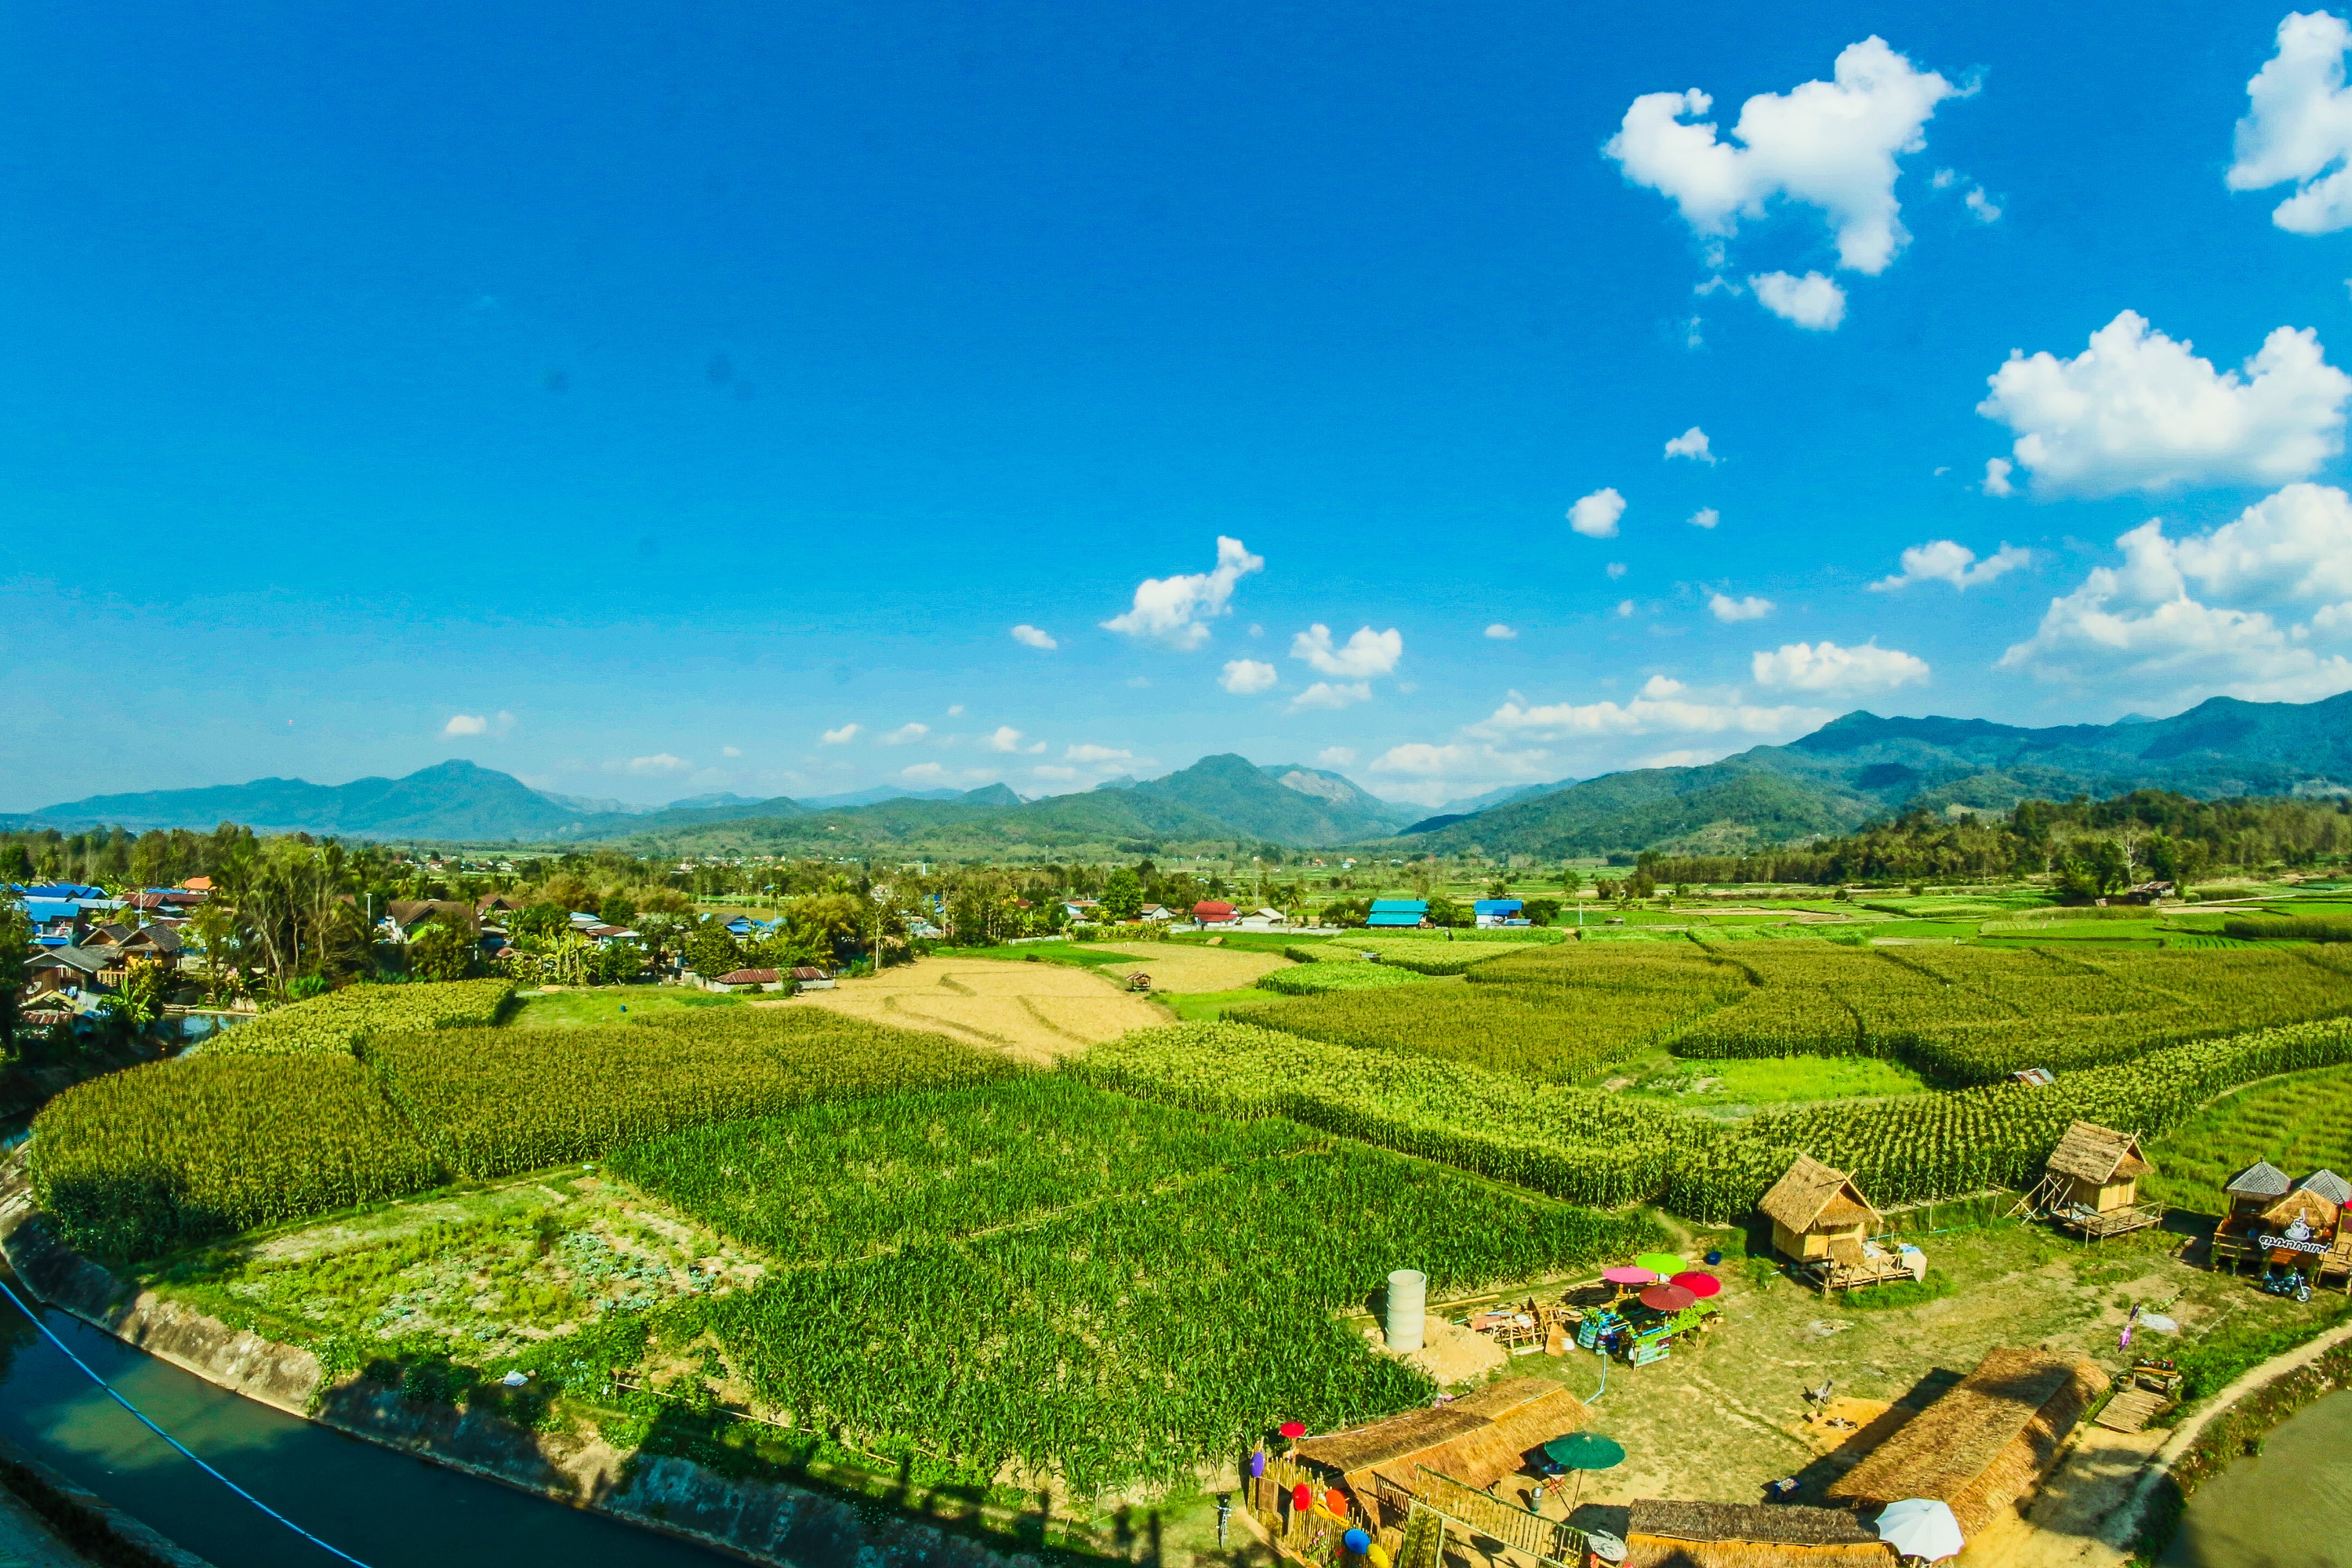 Houses near the rice wheat field under the clear blue skies photo